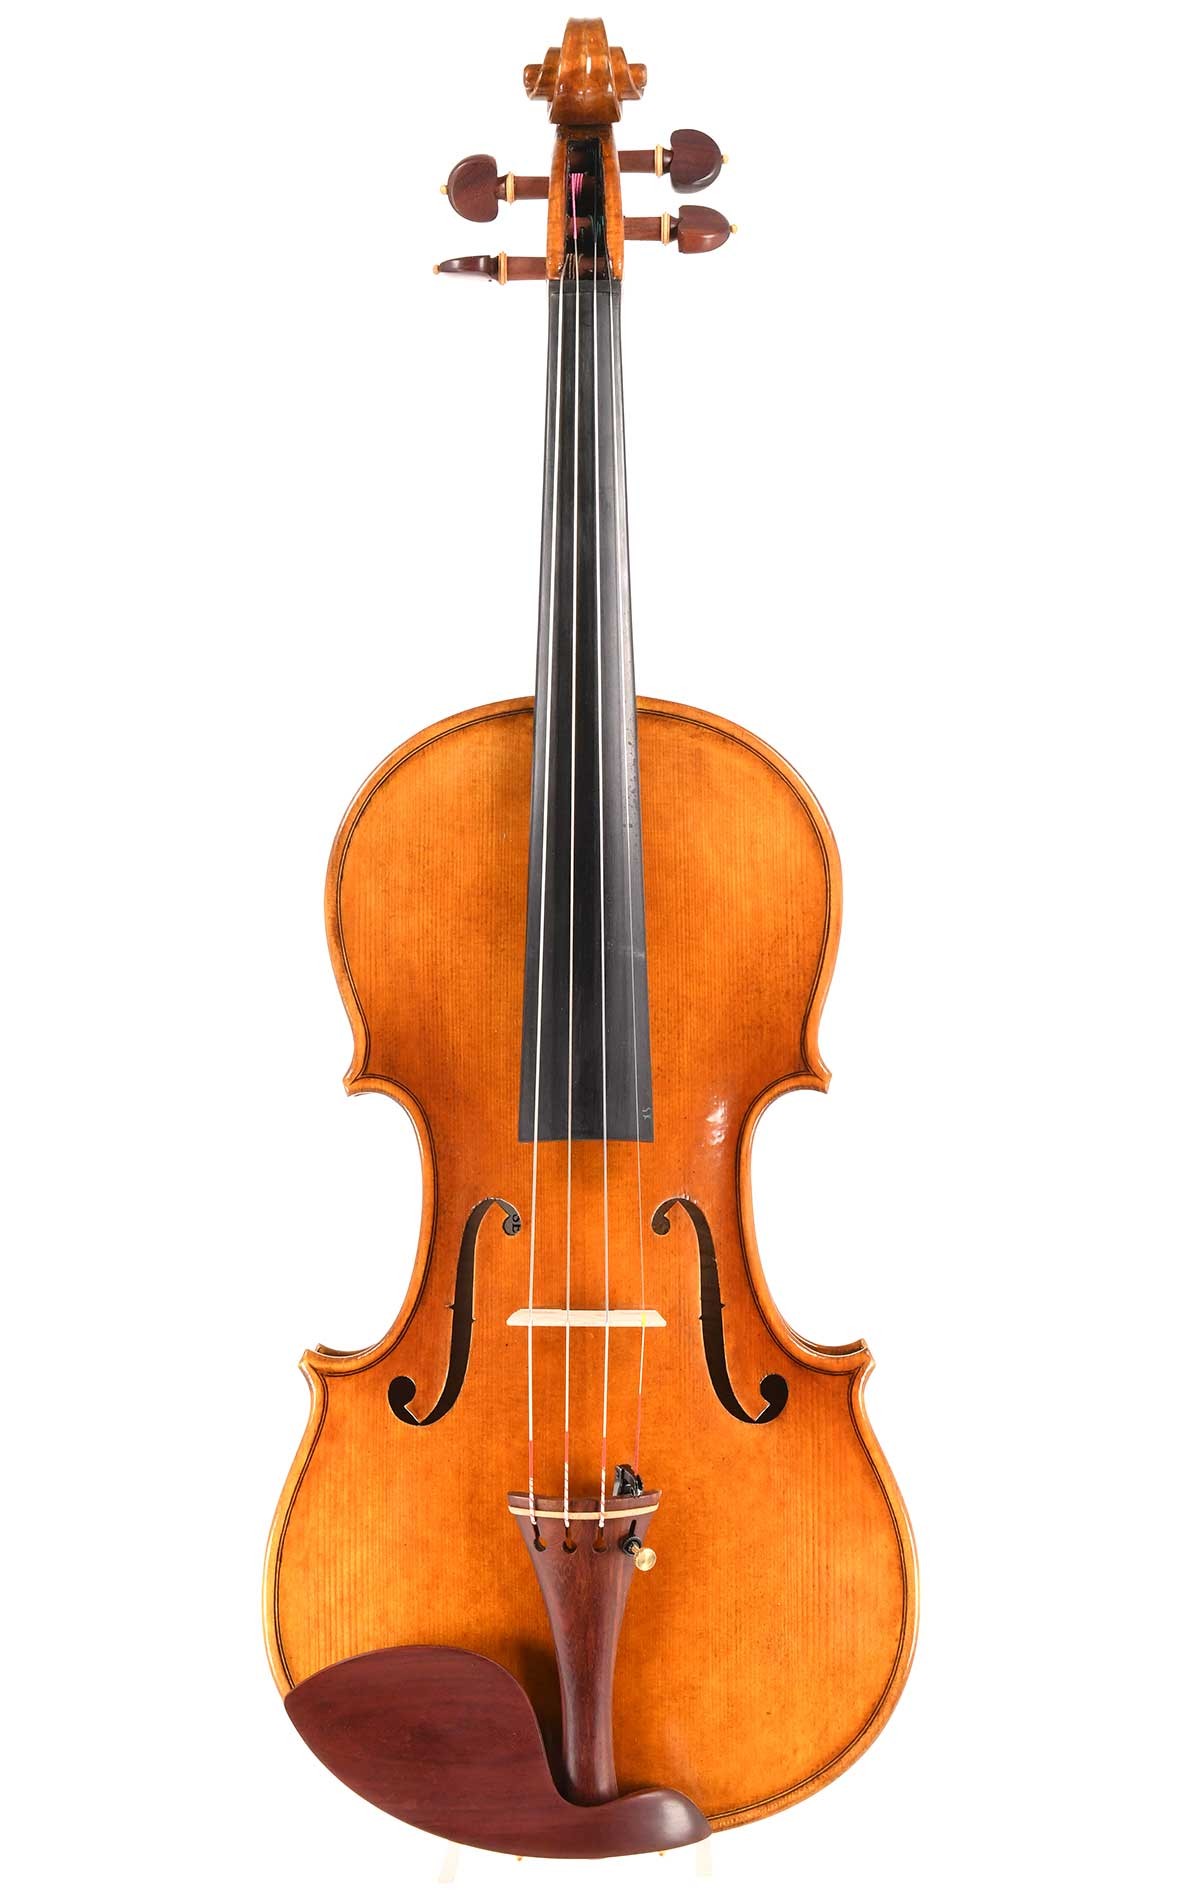 New master violin "CV Selectio" opus 17 - easy playing, radiant sound (set)